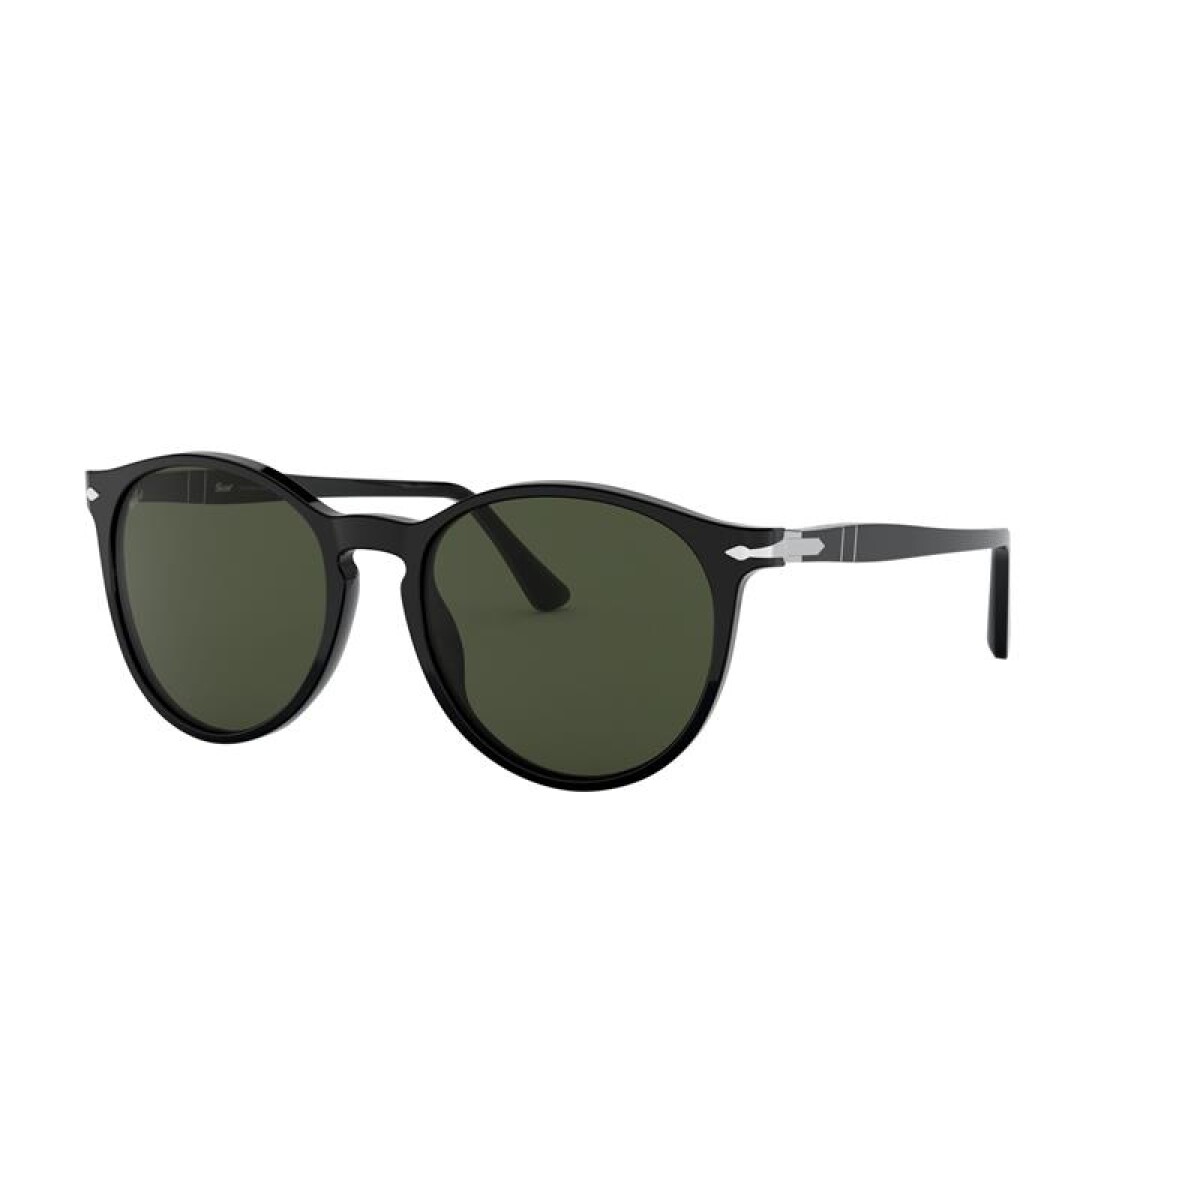 Persol 3228-s - 95/31 